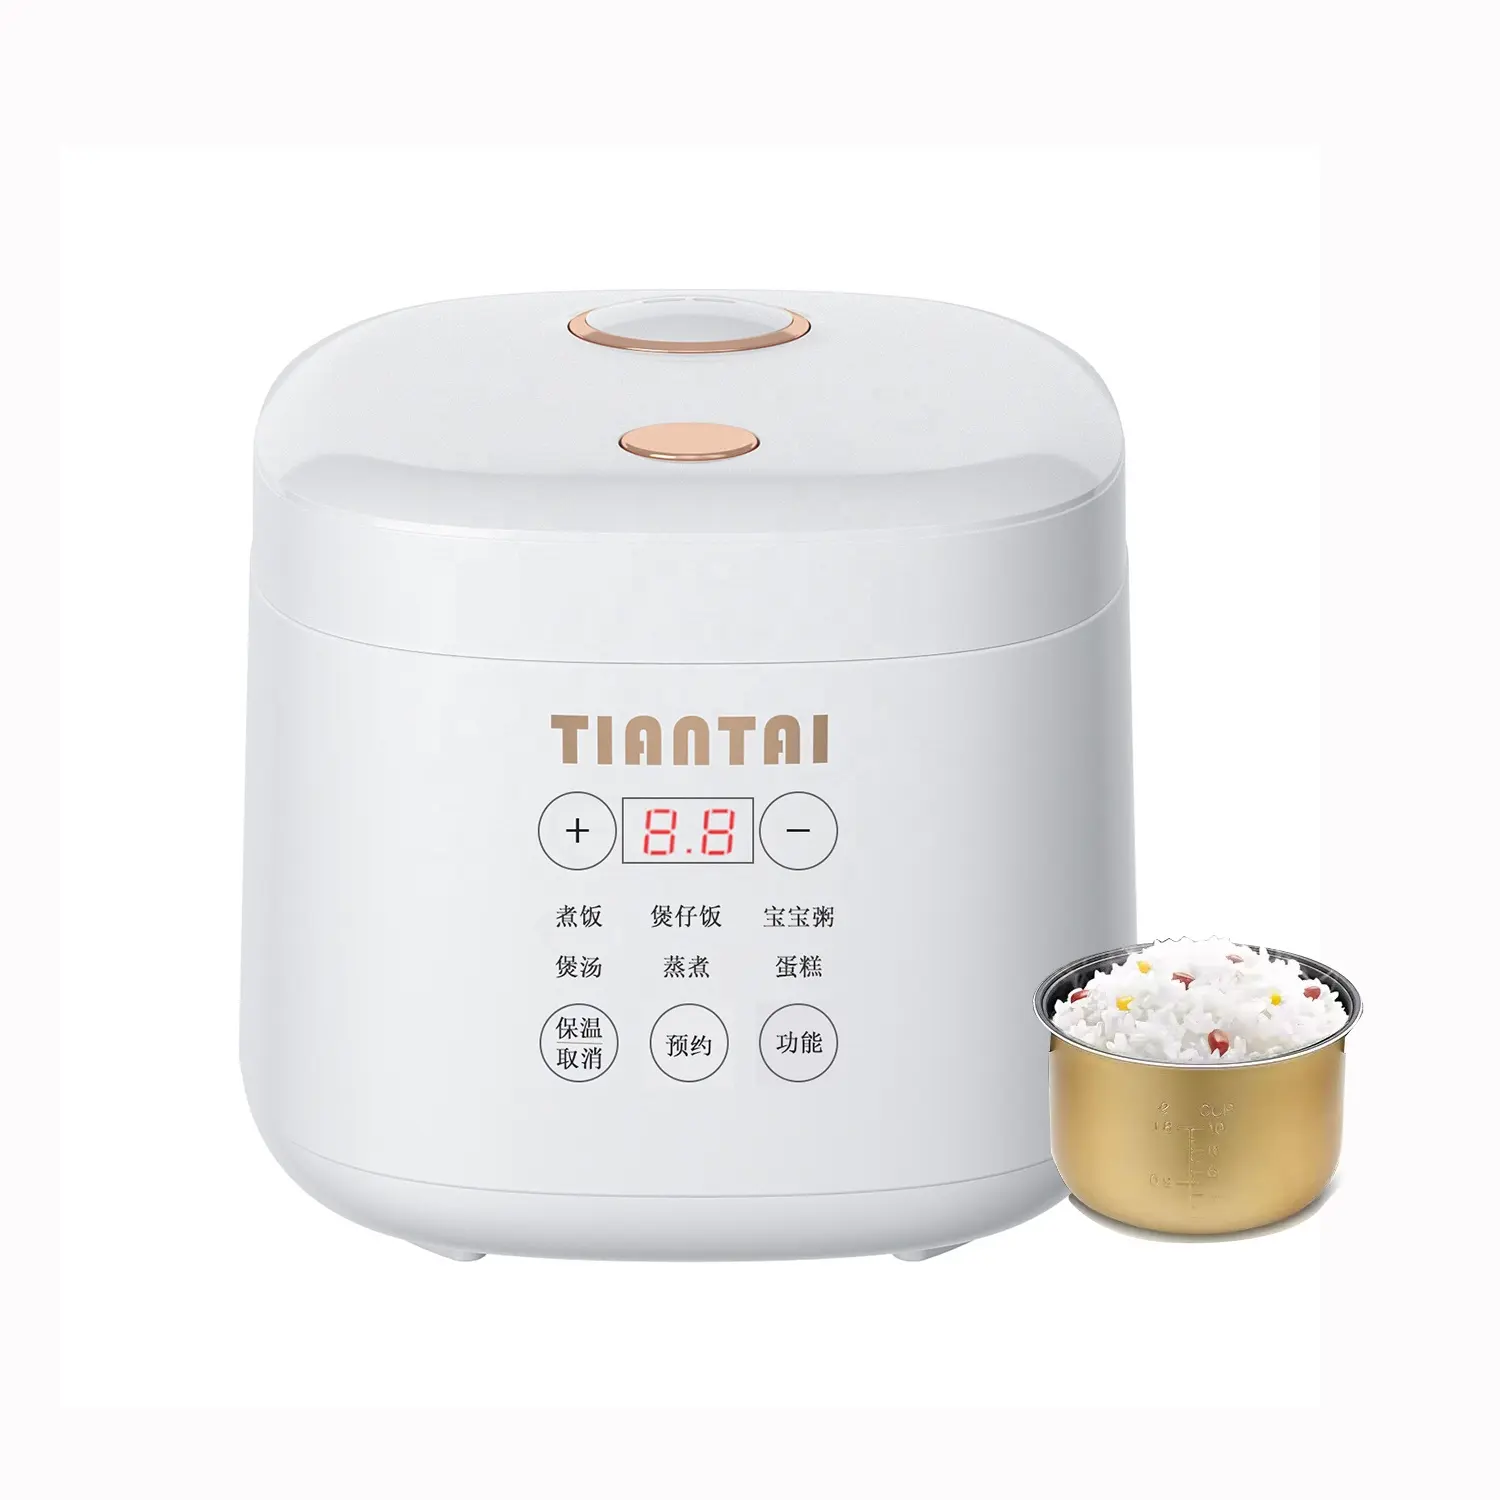 Household Electro Appliance Rise Cooker Korea Electric Mini Rice Cooker Low Sugar Smart Cookers